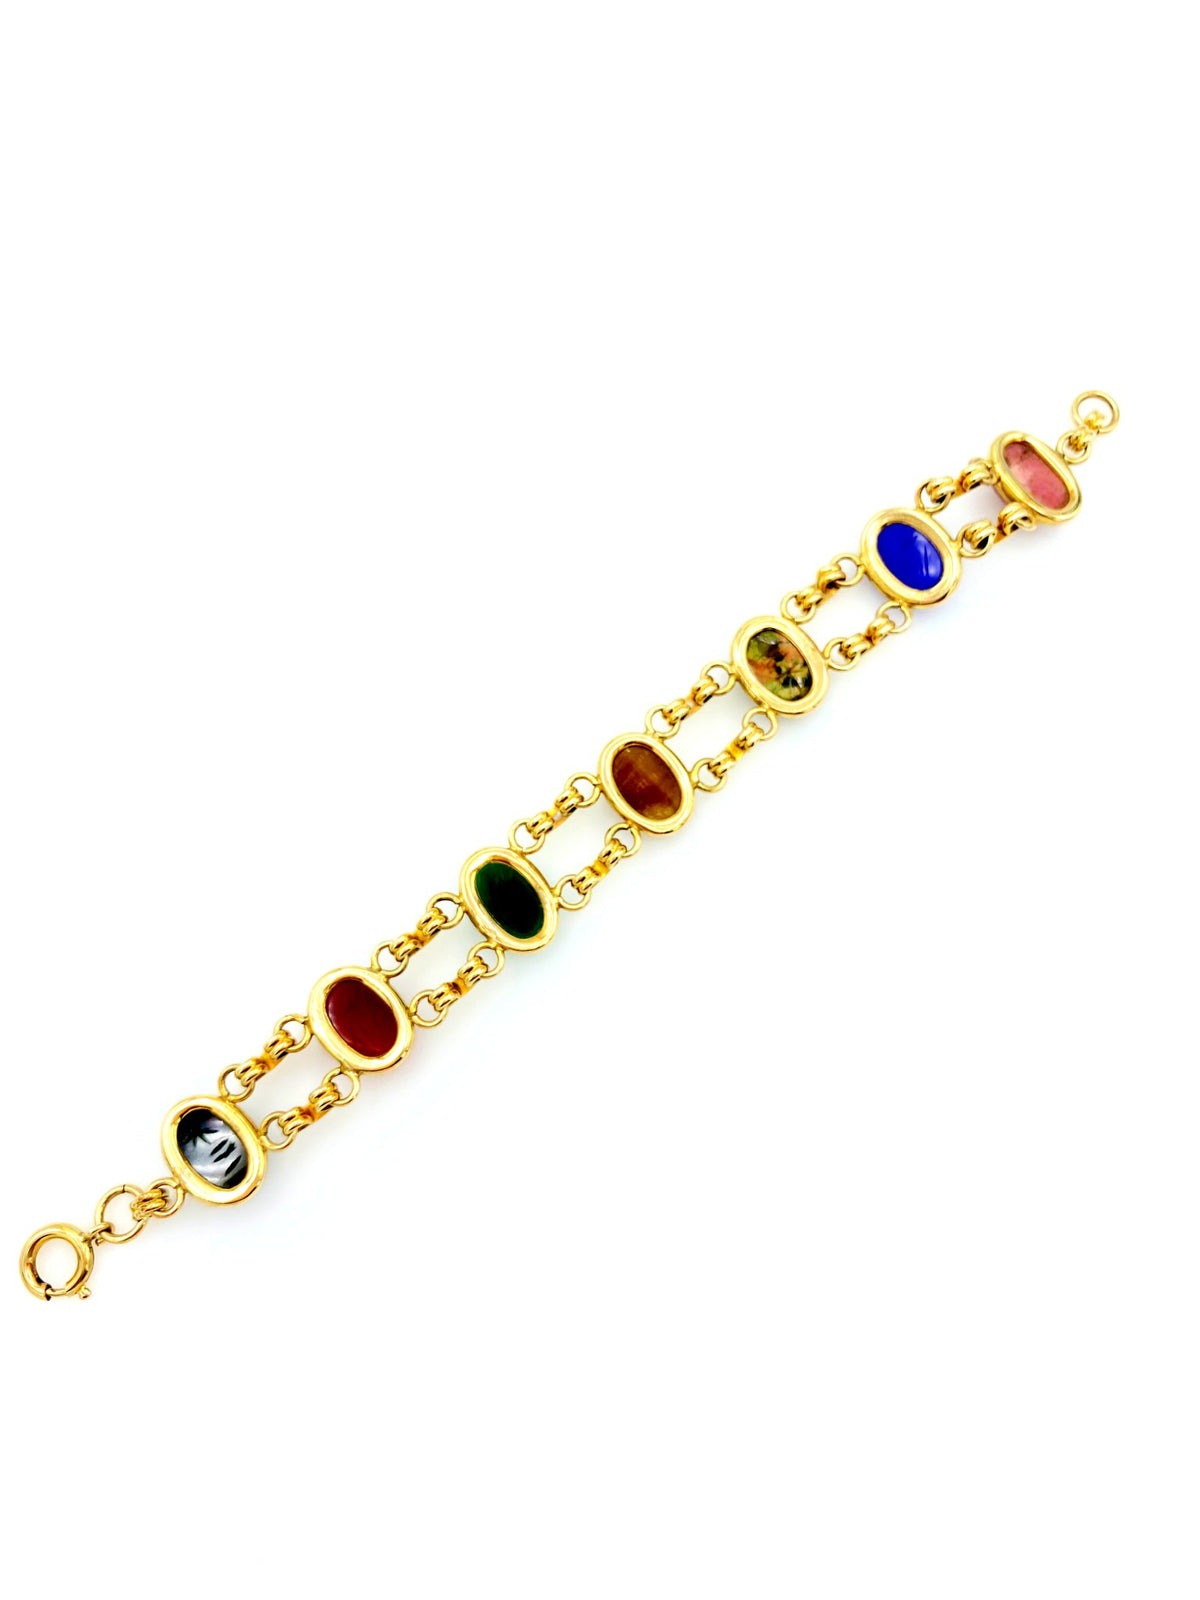 Vintage 12K Gold Filled Semi-Presious Stone Scarab Layering Charm Bracelet - 24 Wishes Vintage Jewelry